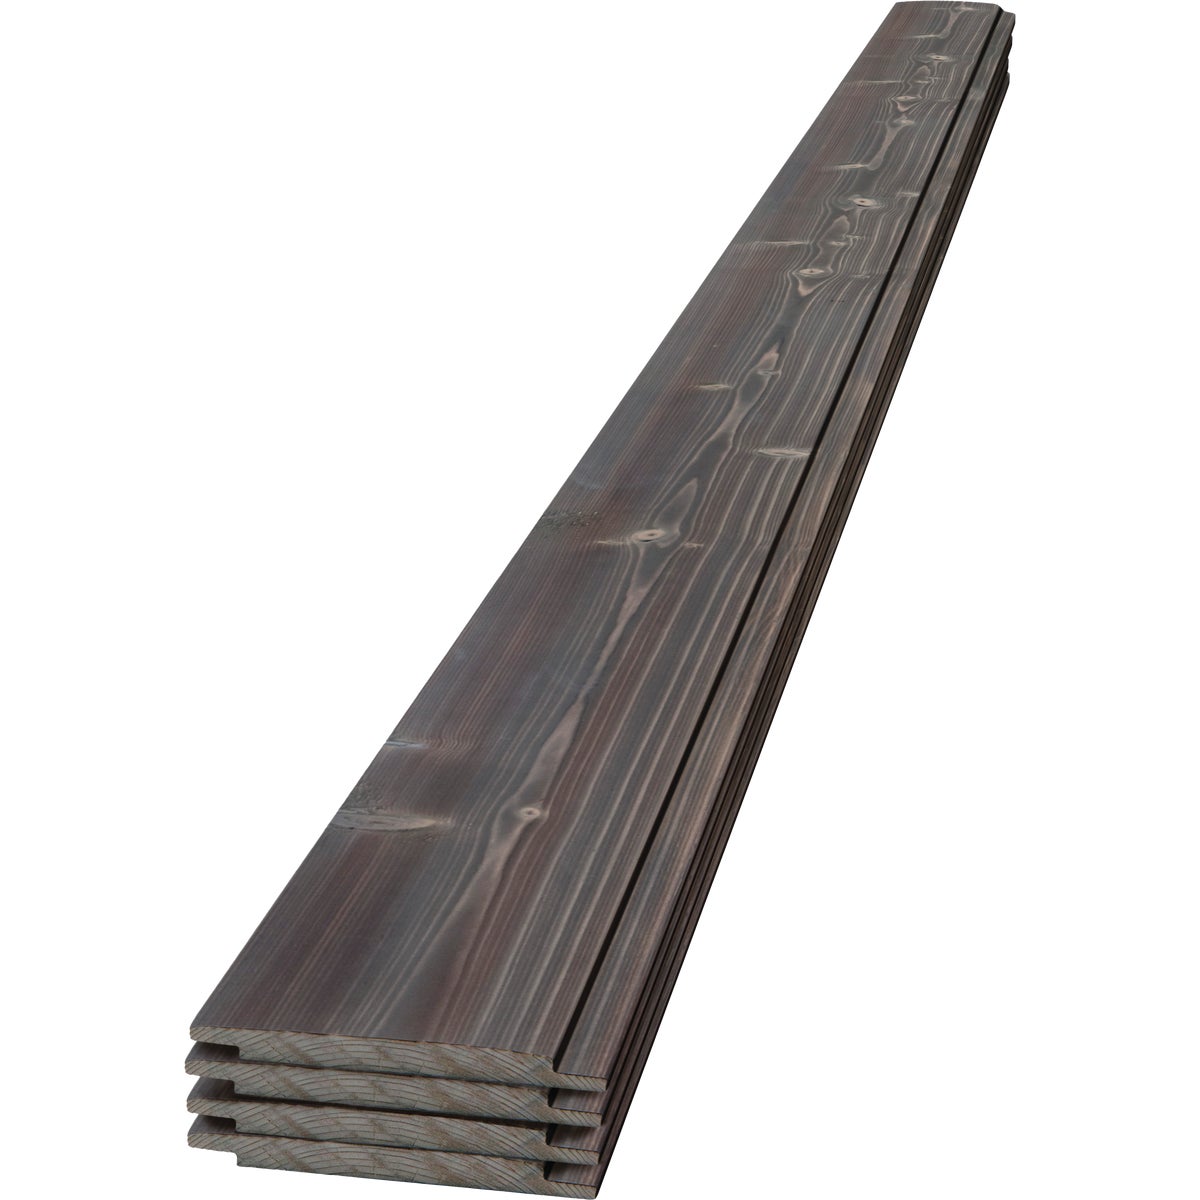 UFP-Edge 6 In. W x 8 Ft. L x 1 In. Thick Charred Ash Wood Shiplap Board (12.33 Sq. Ft./4-Pack)